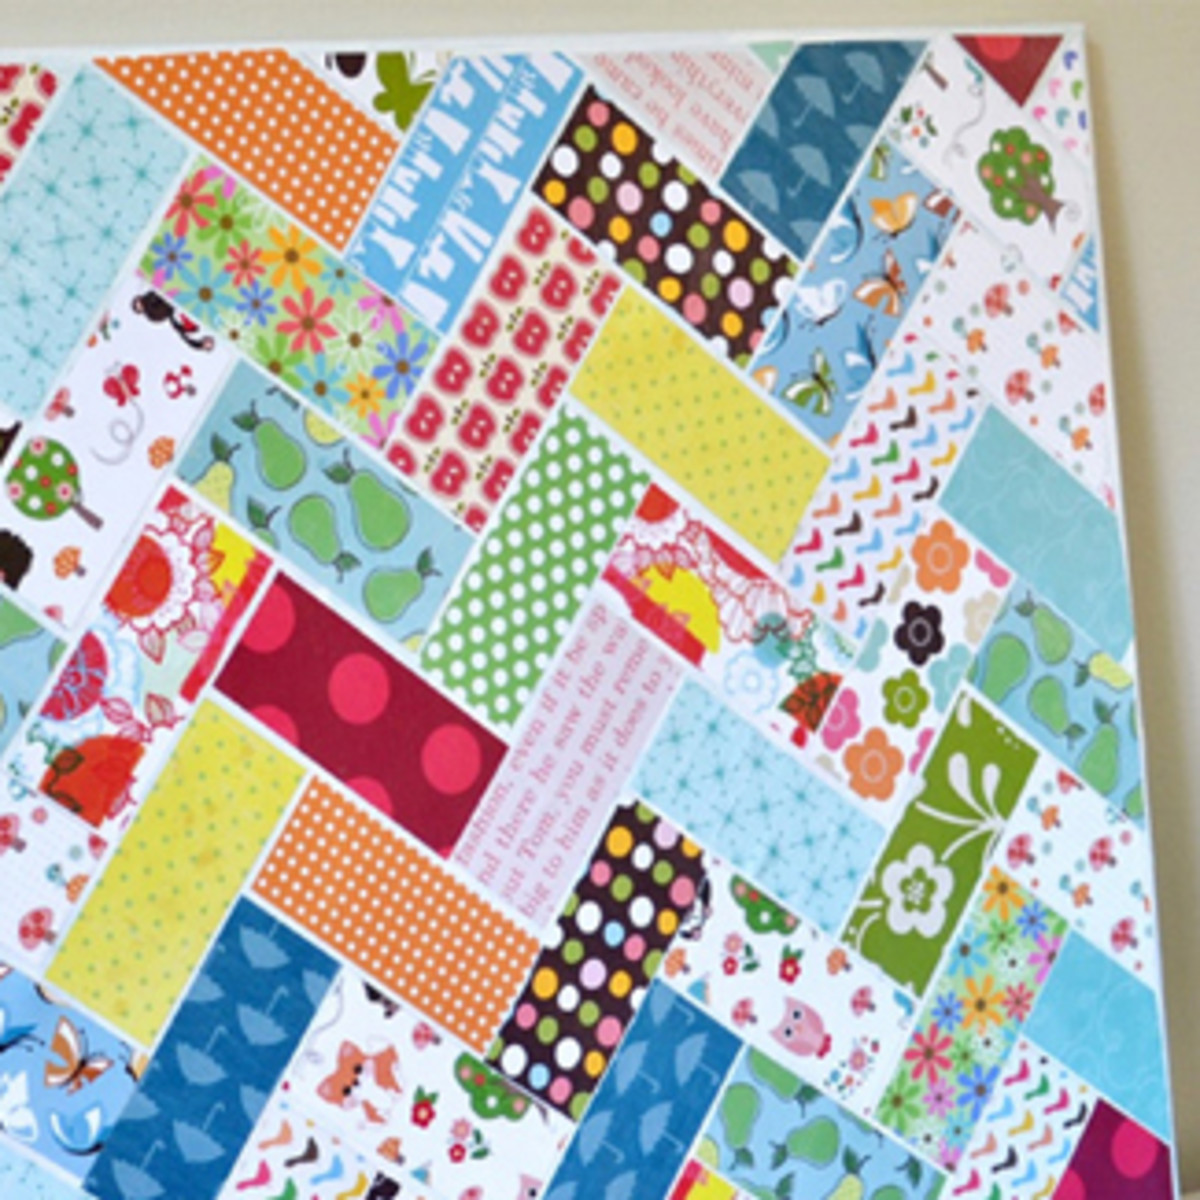 You can use different patterned paper scraps to create a new quilt paper.